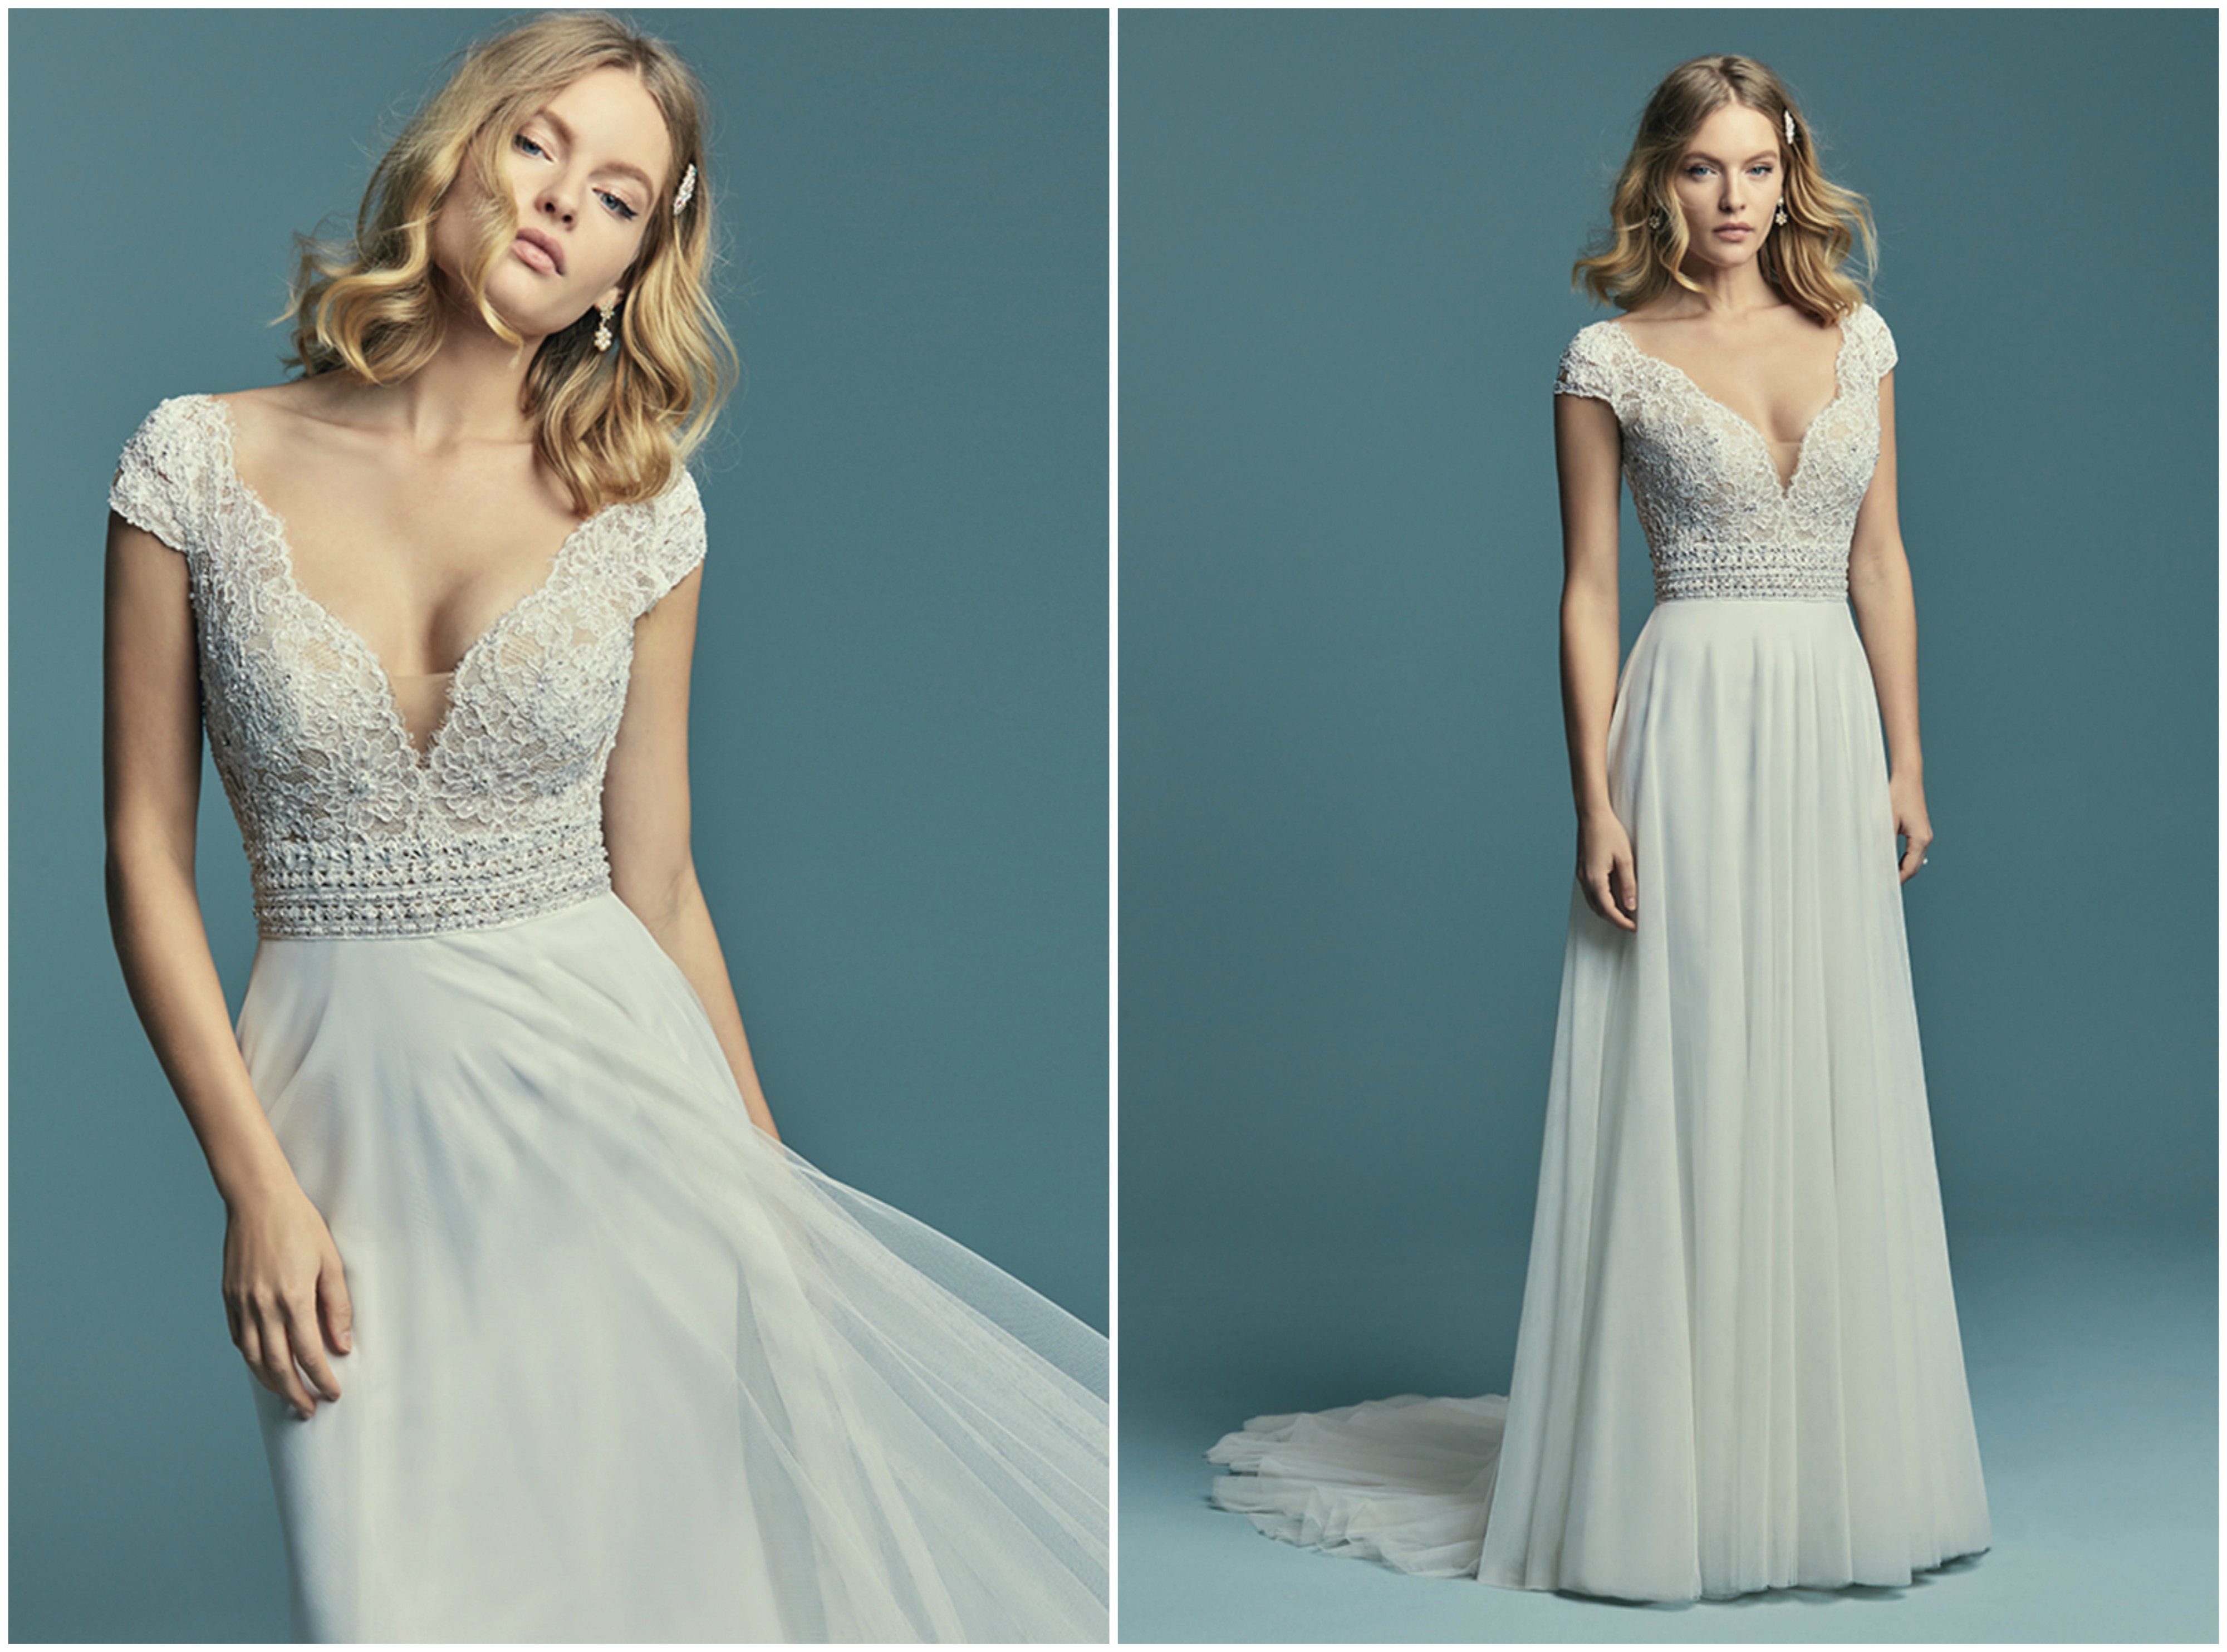 <a href="https://www.maggiesottero.com/maggie-sottero/monarch/11498" target="_blank">Maggie Sottero</a>